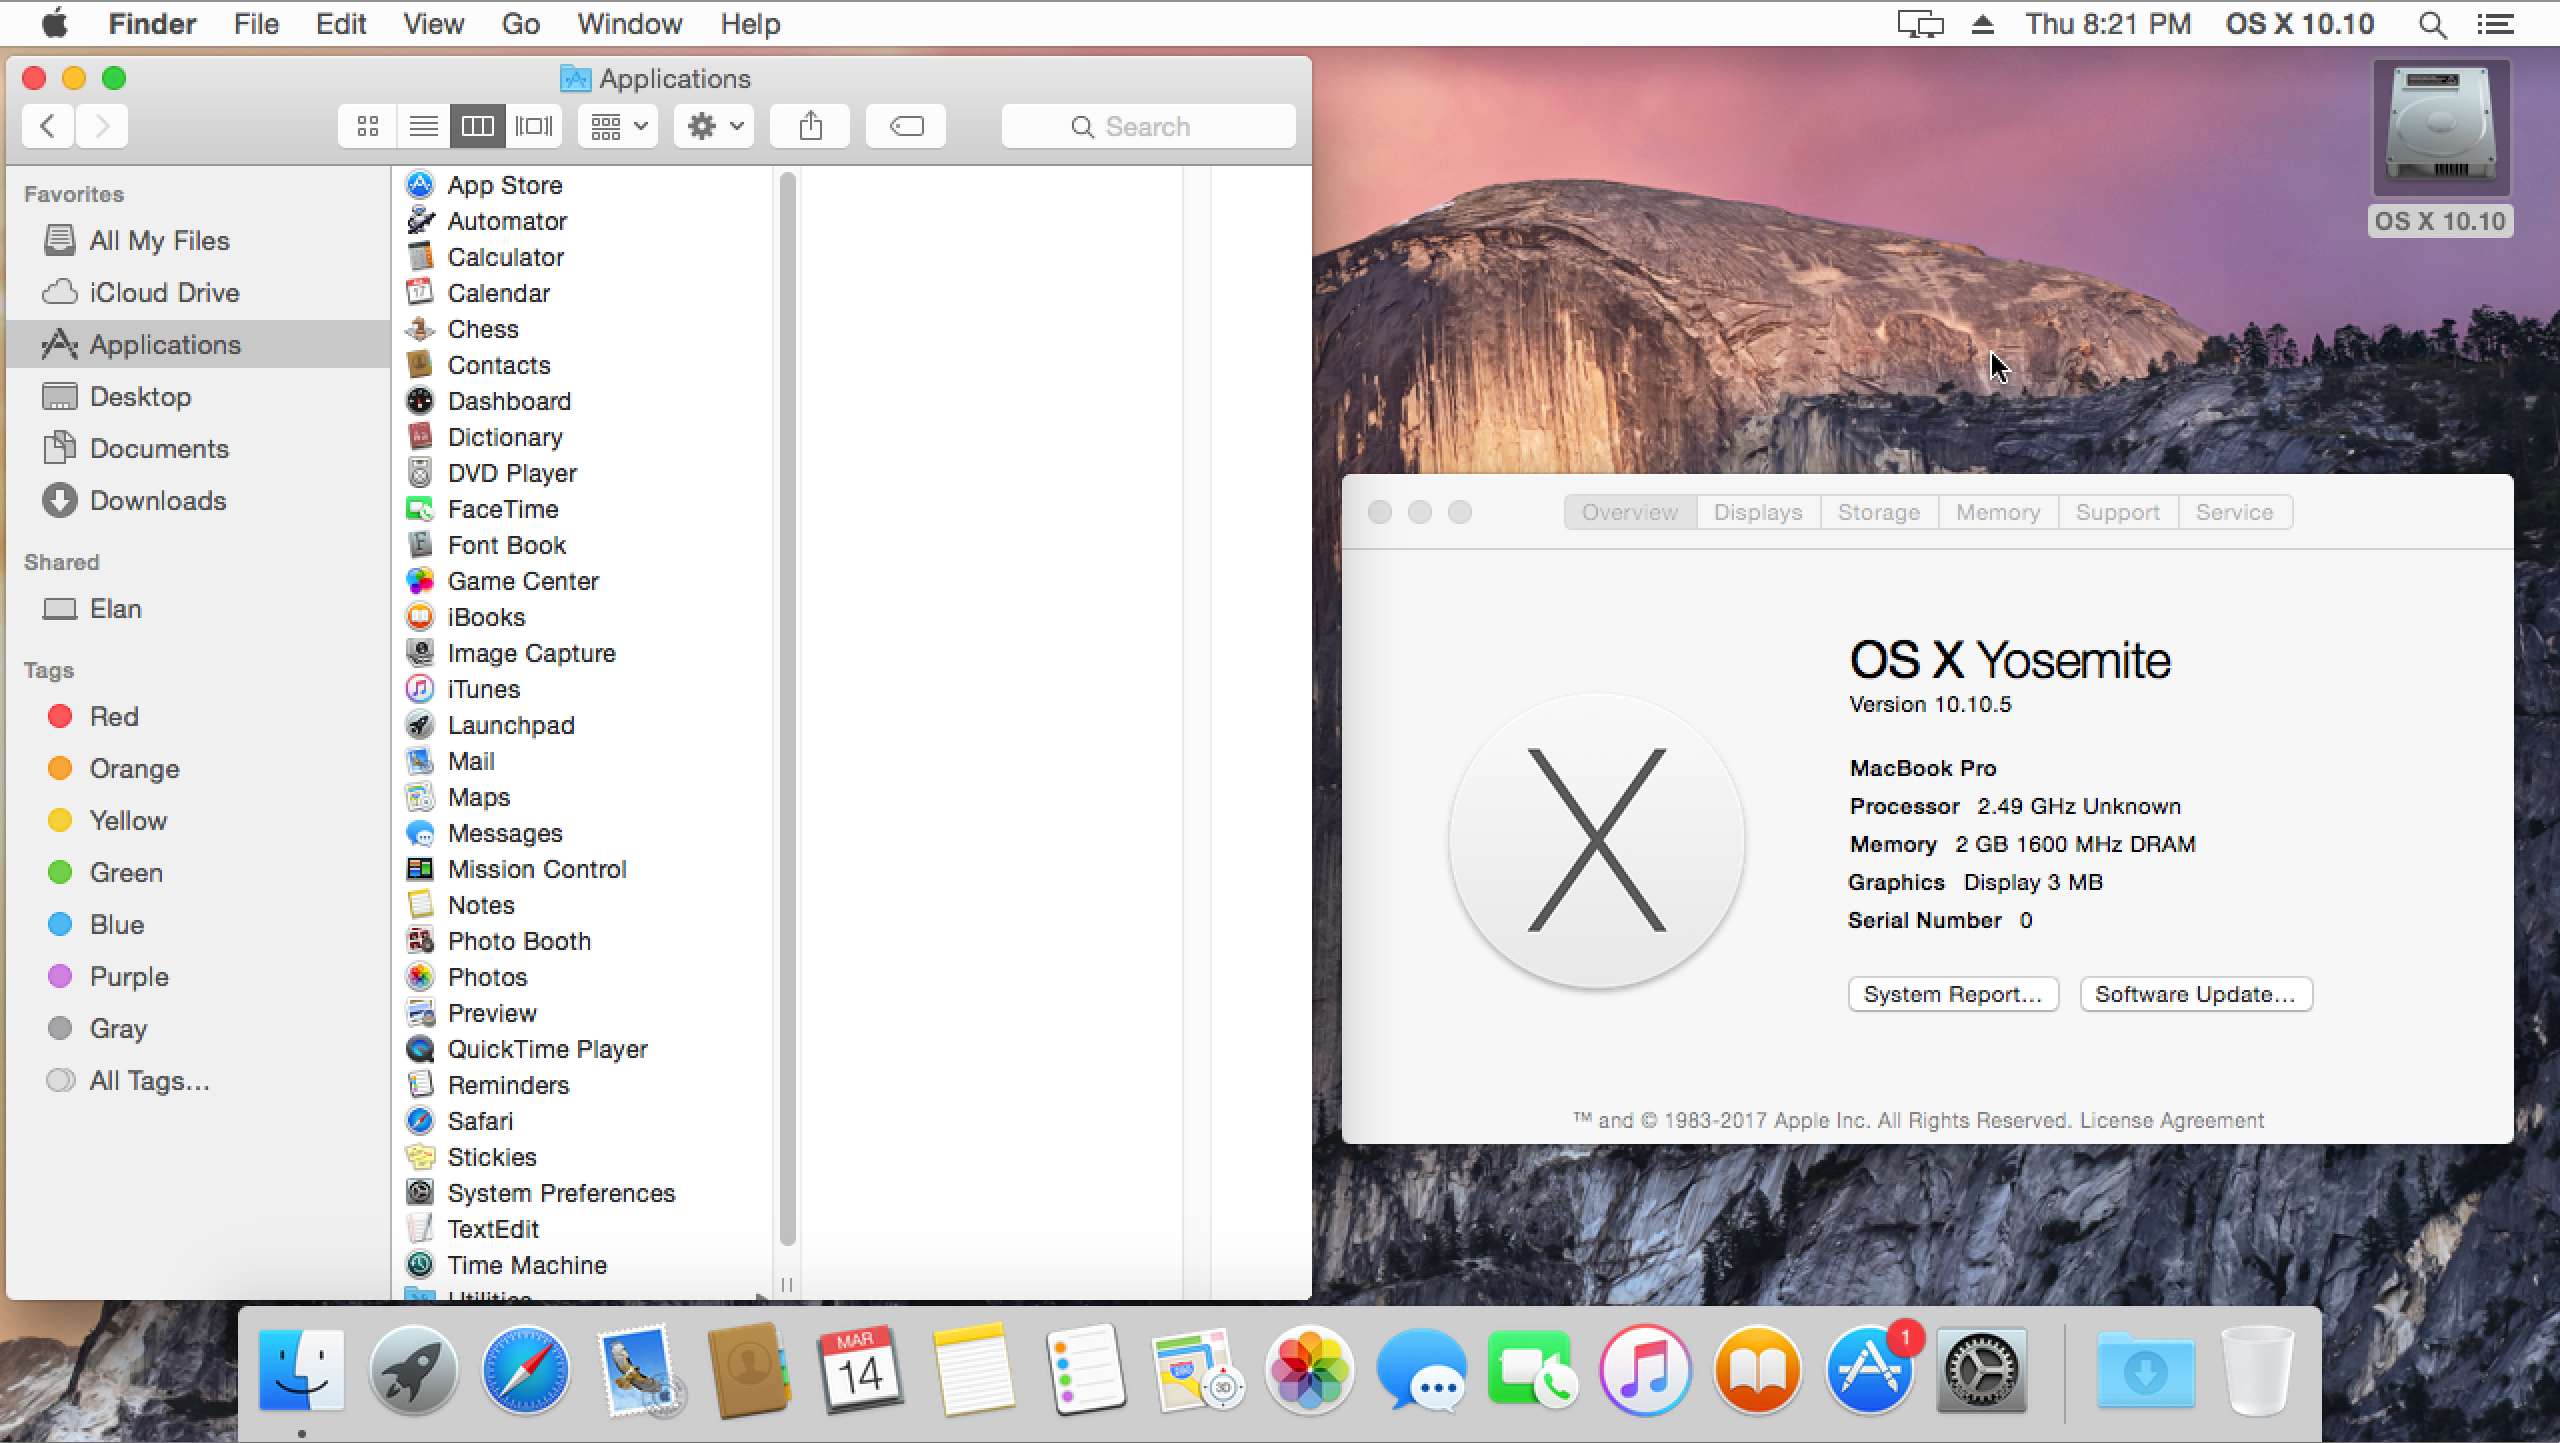 xcode for mac os 10.10.5